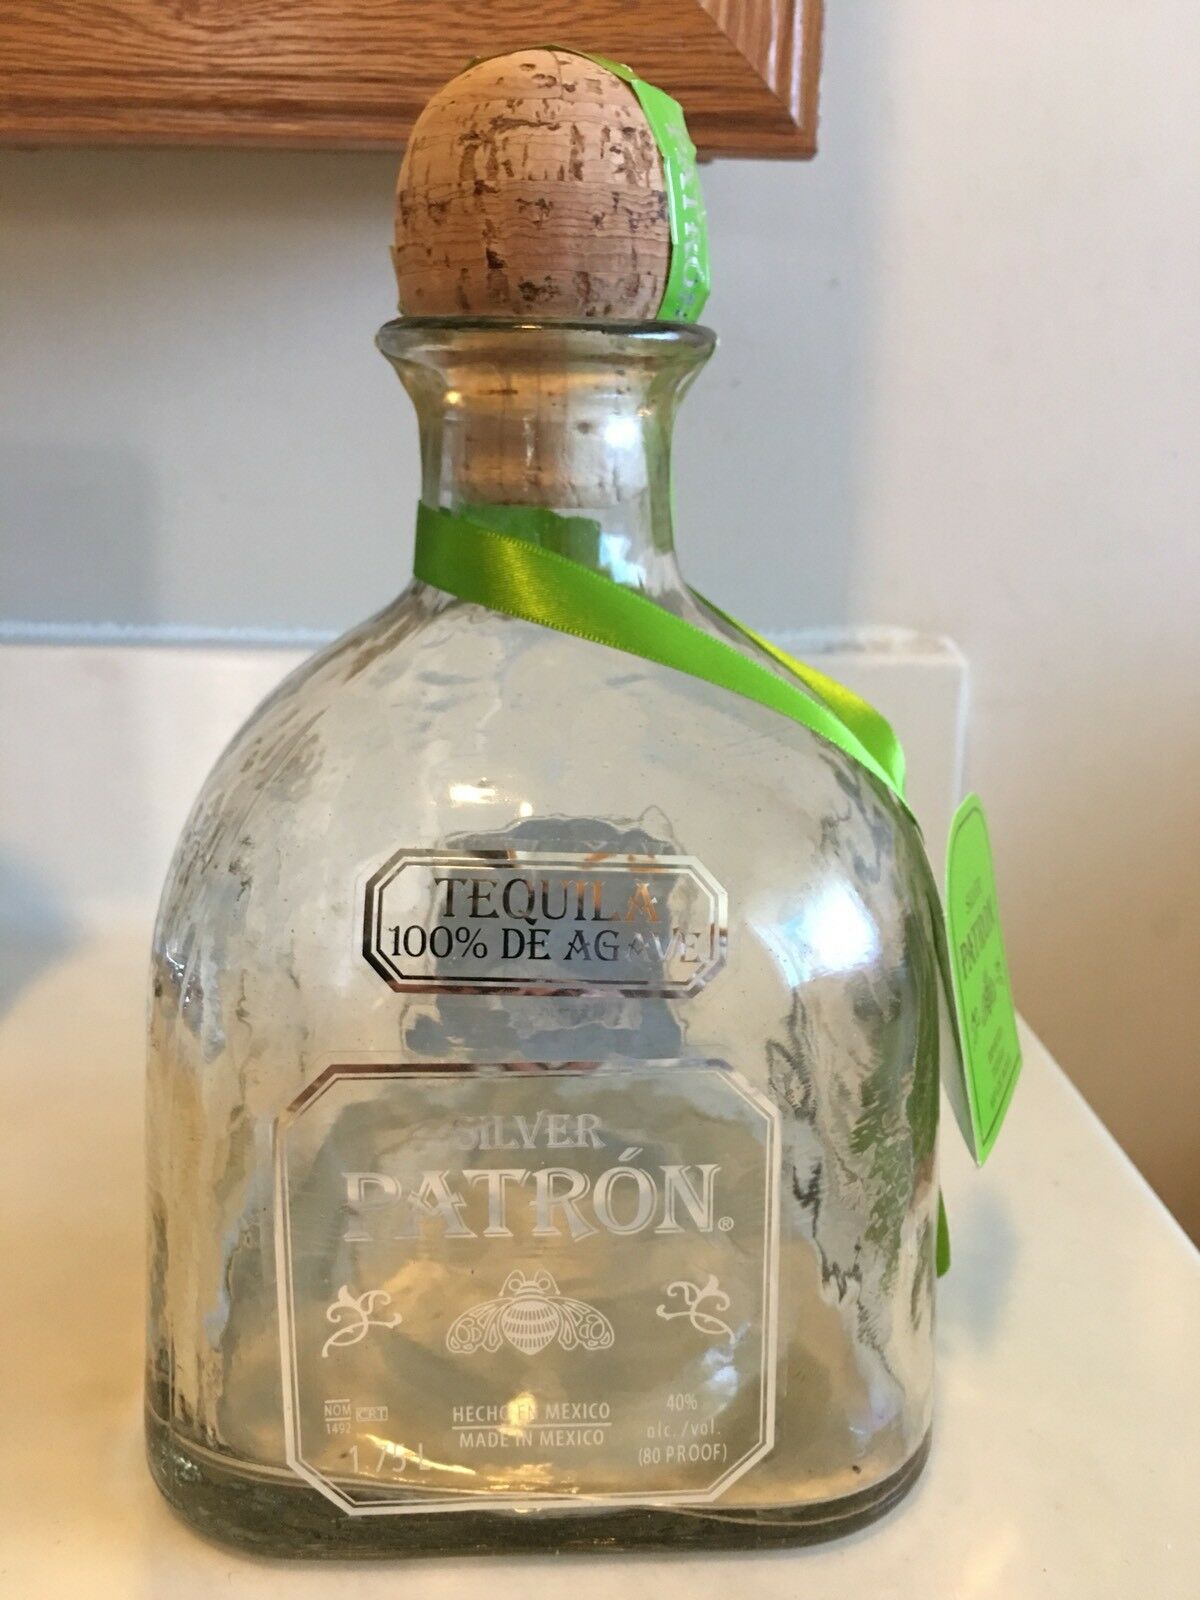 *** Patron Silver Tequila Bottle 1.75L Empty With Cork And Tag ***